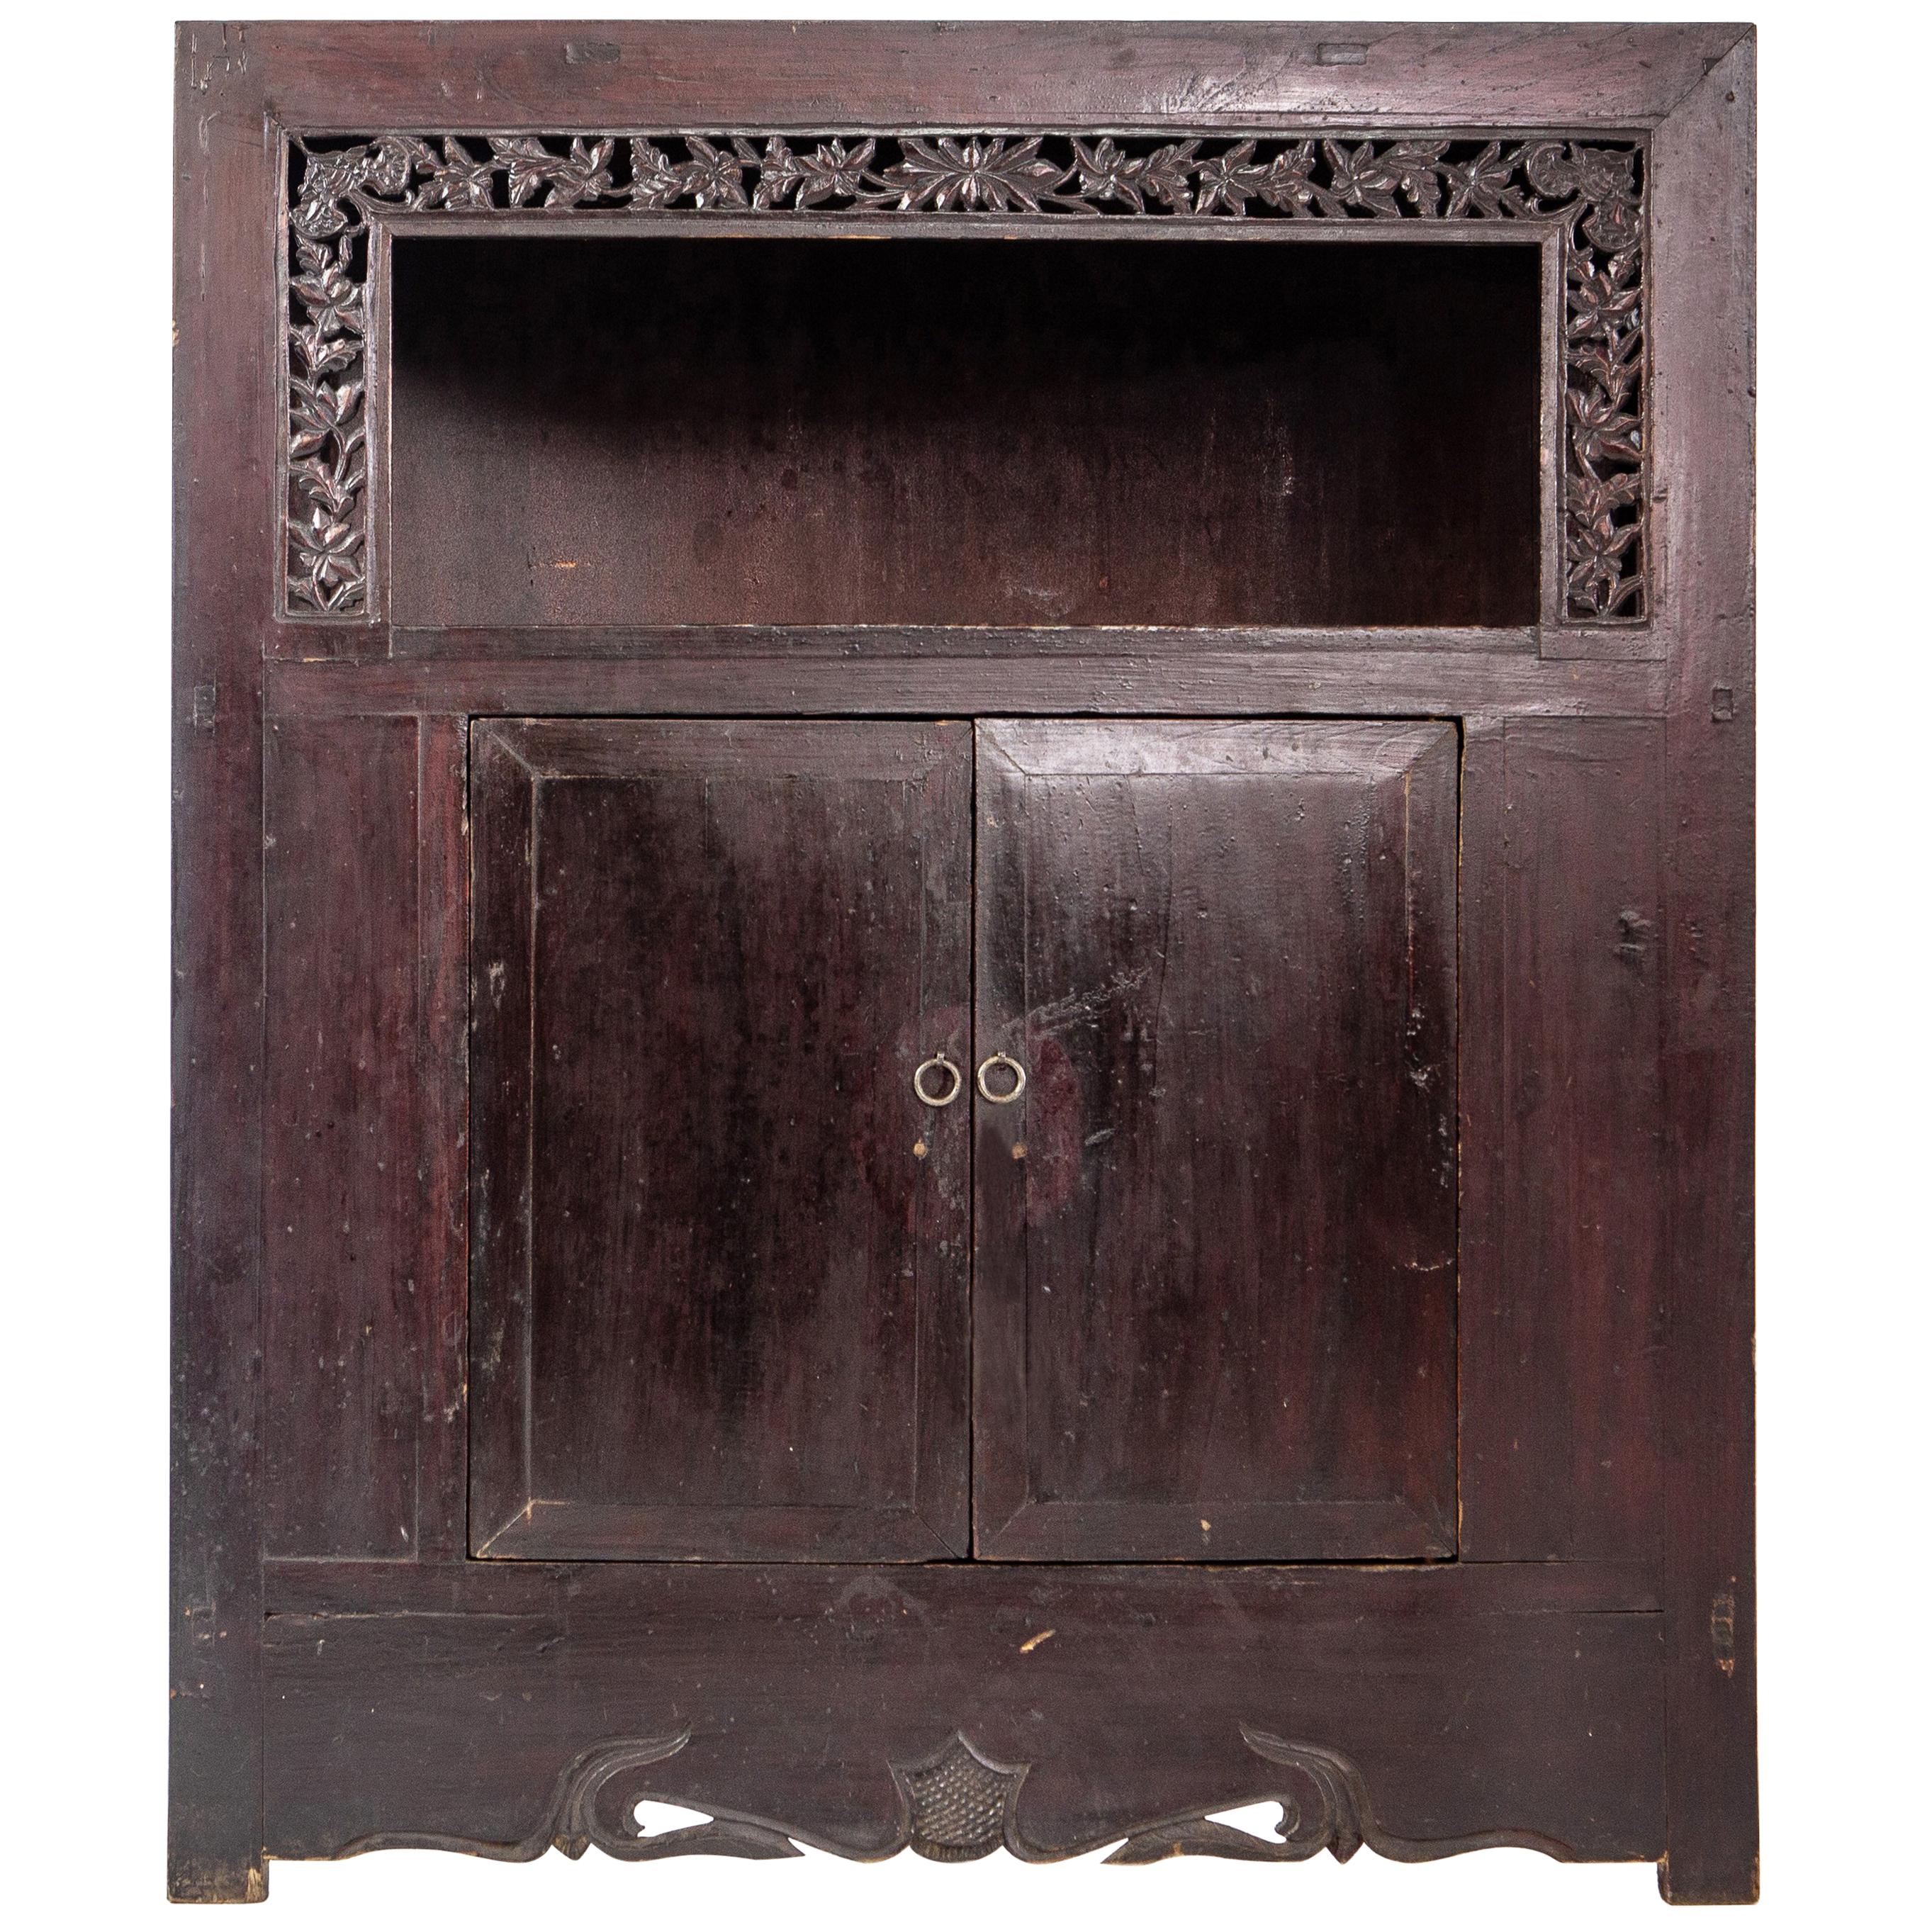 Middle-Qing Dynasty Display Cabinet